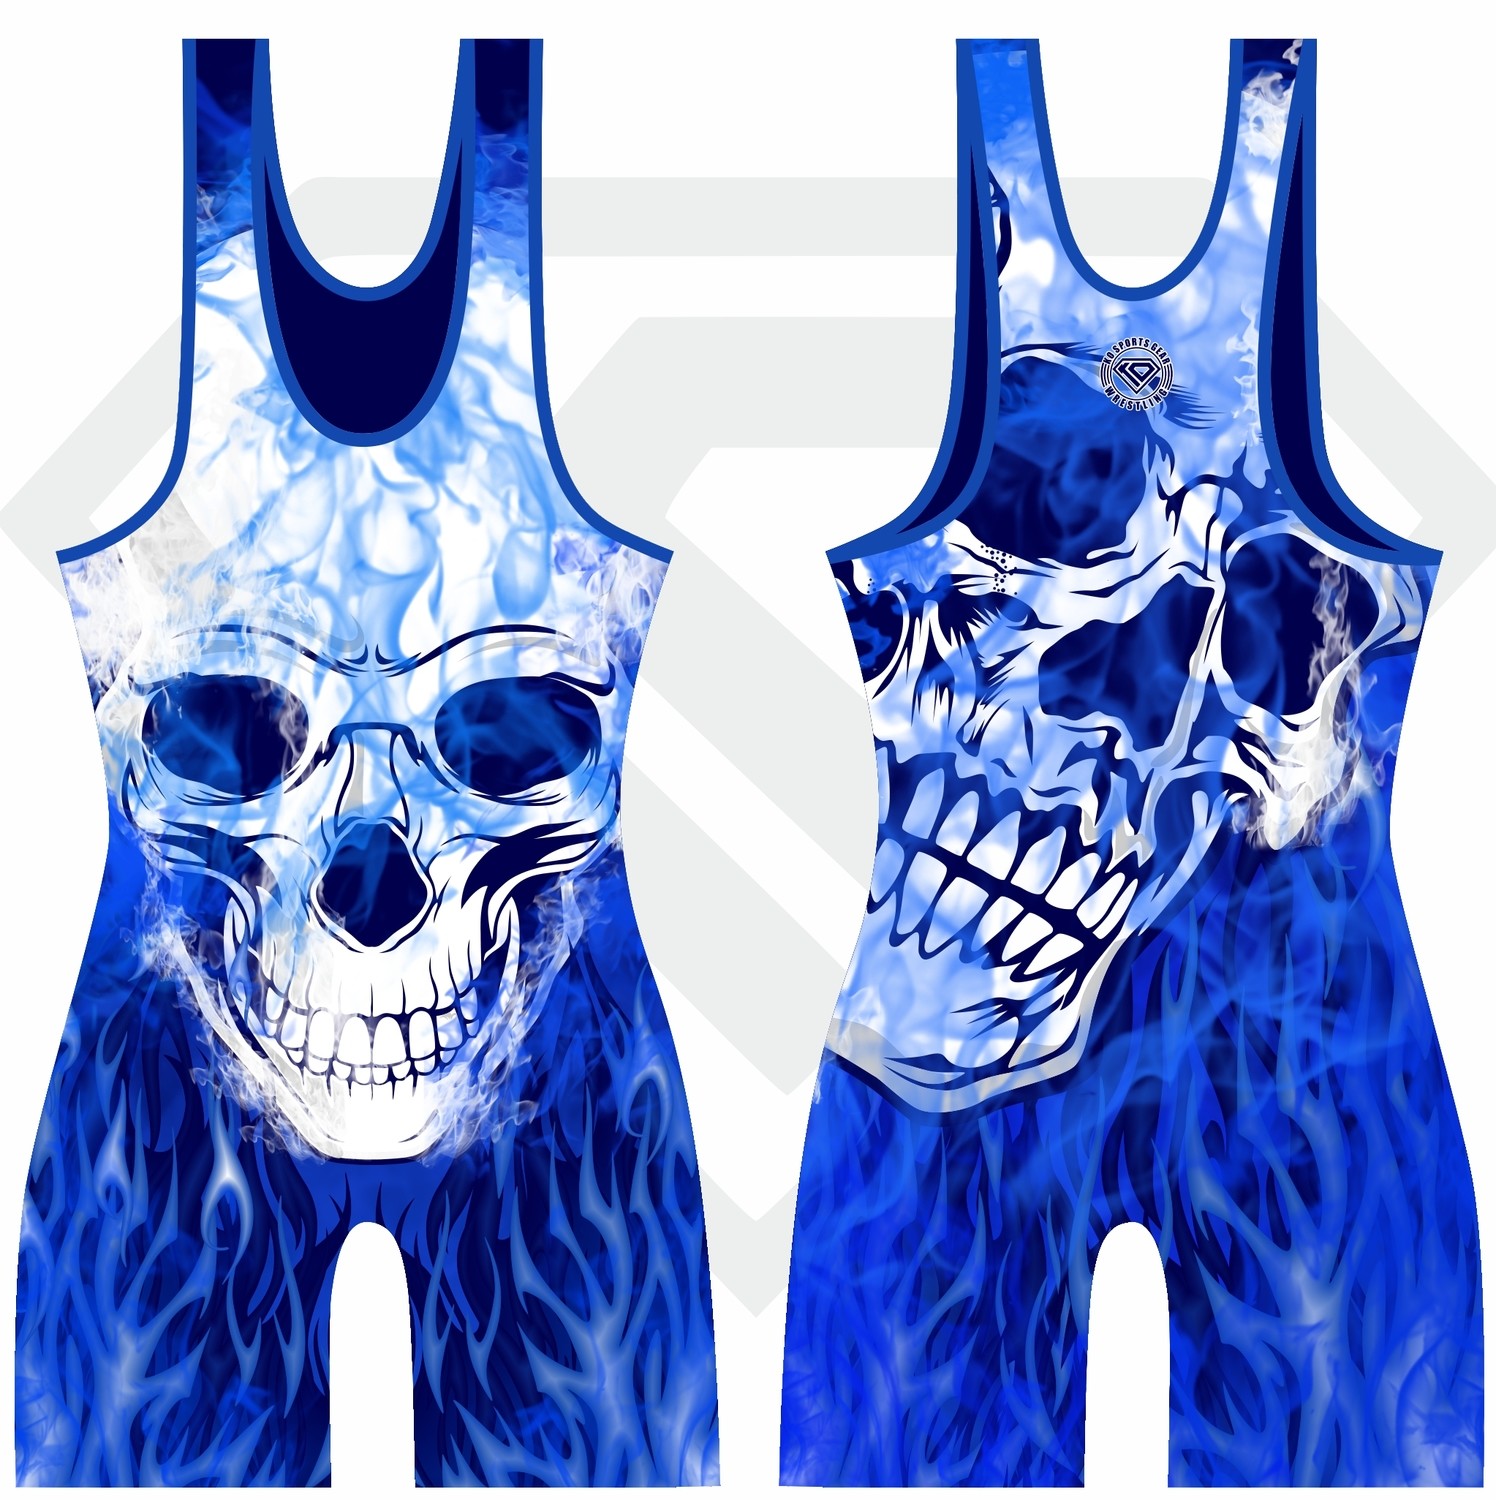 KO Sports Gear Gold and Blue Skull Wrestling Singlet Closeout Priced 